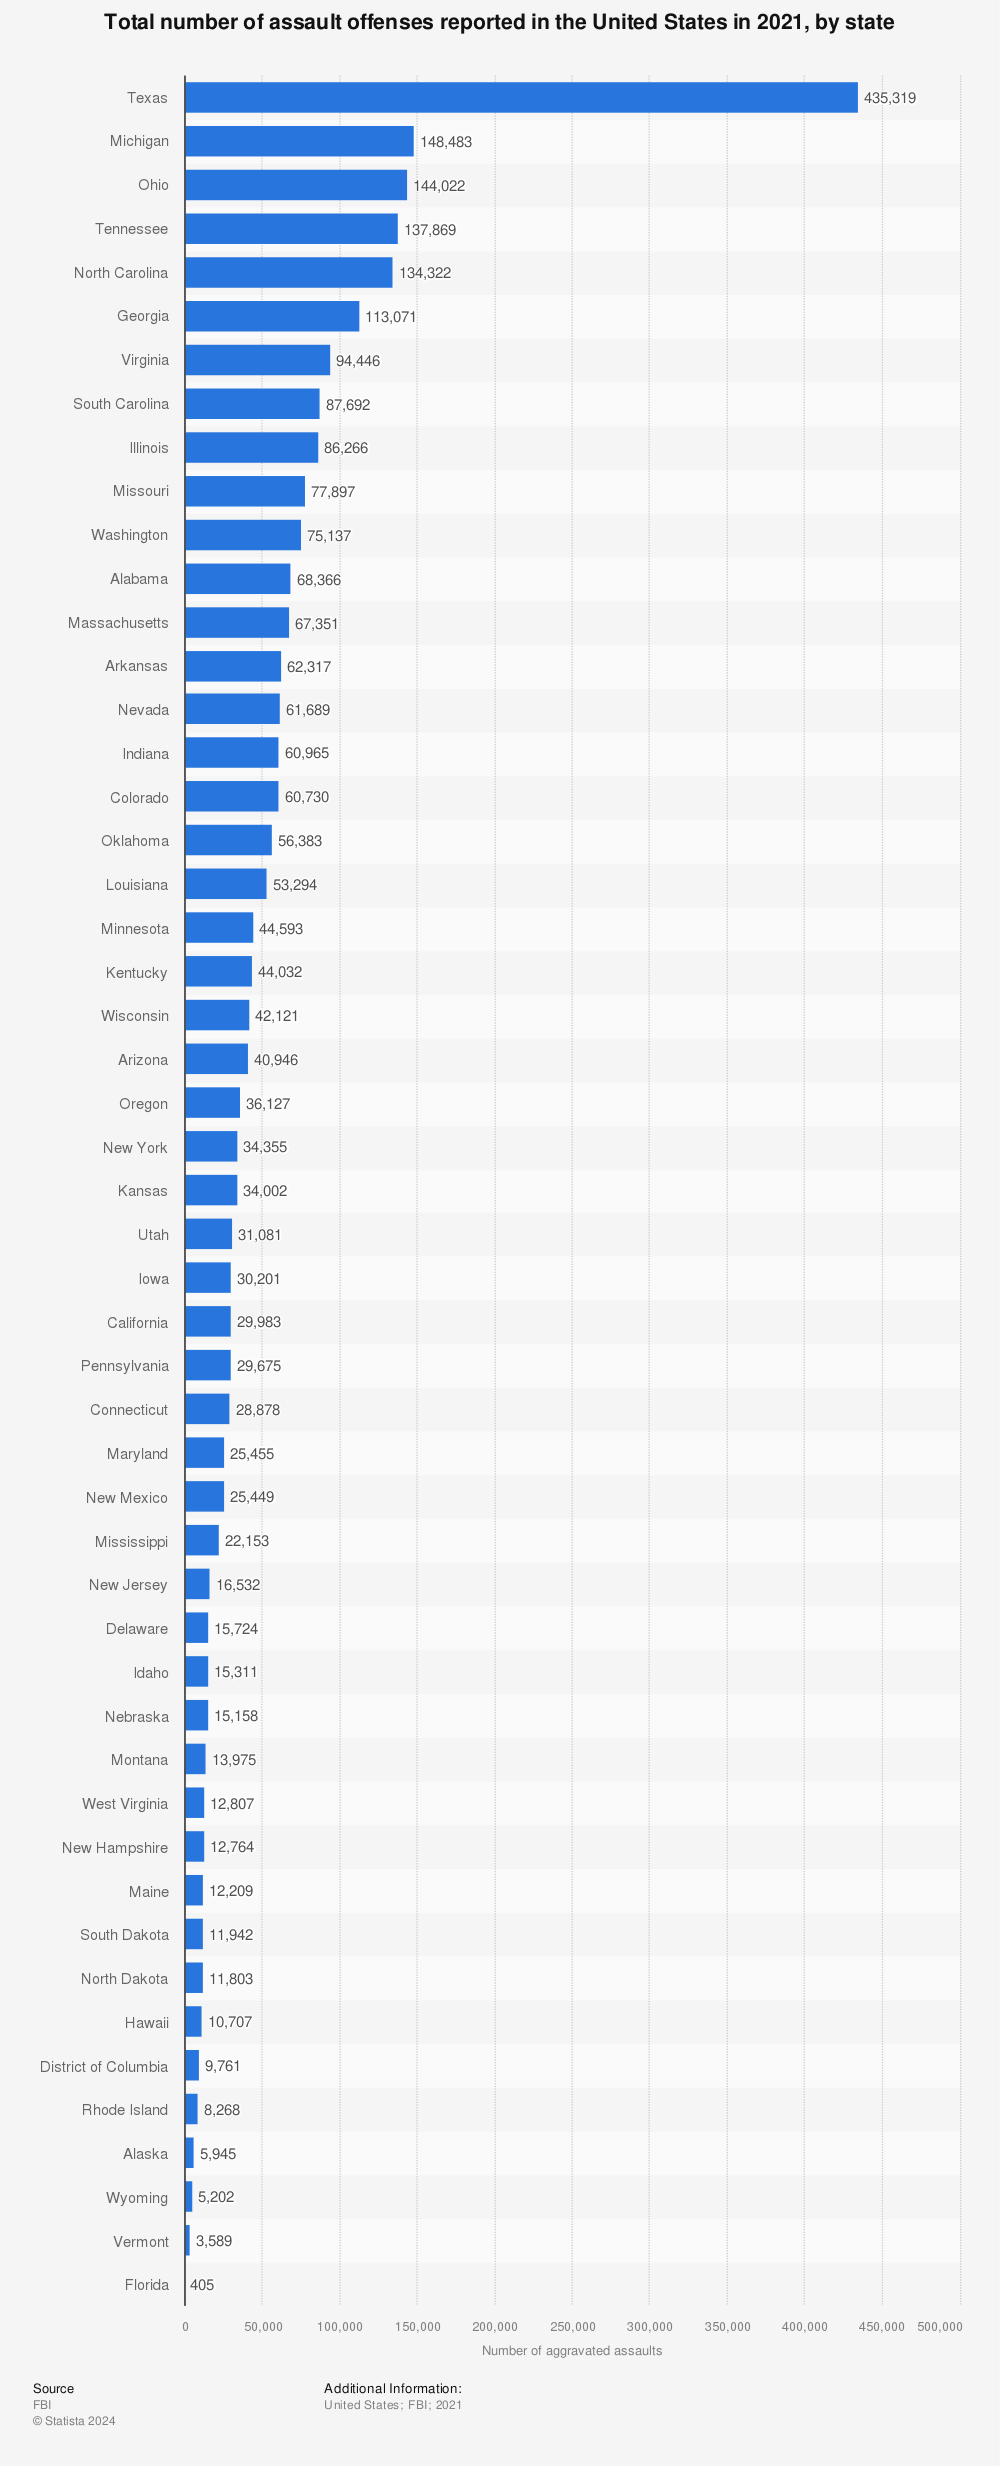 Statistic: Total number of aggravated assaults reported in the United States in 2020, by state | Statista